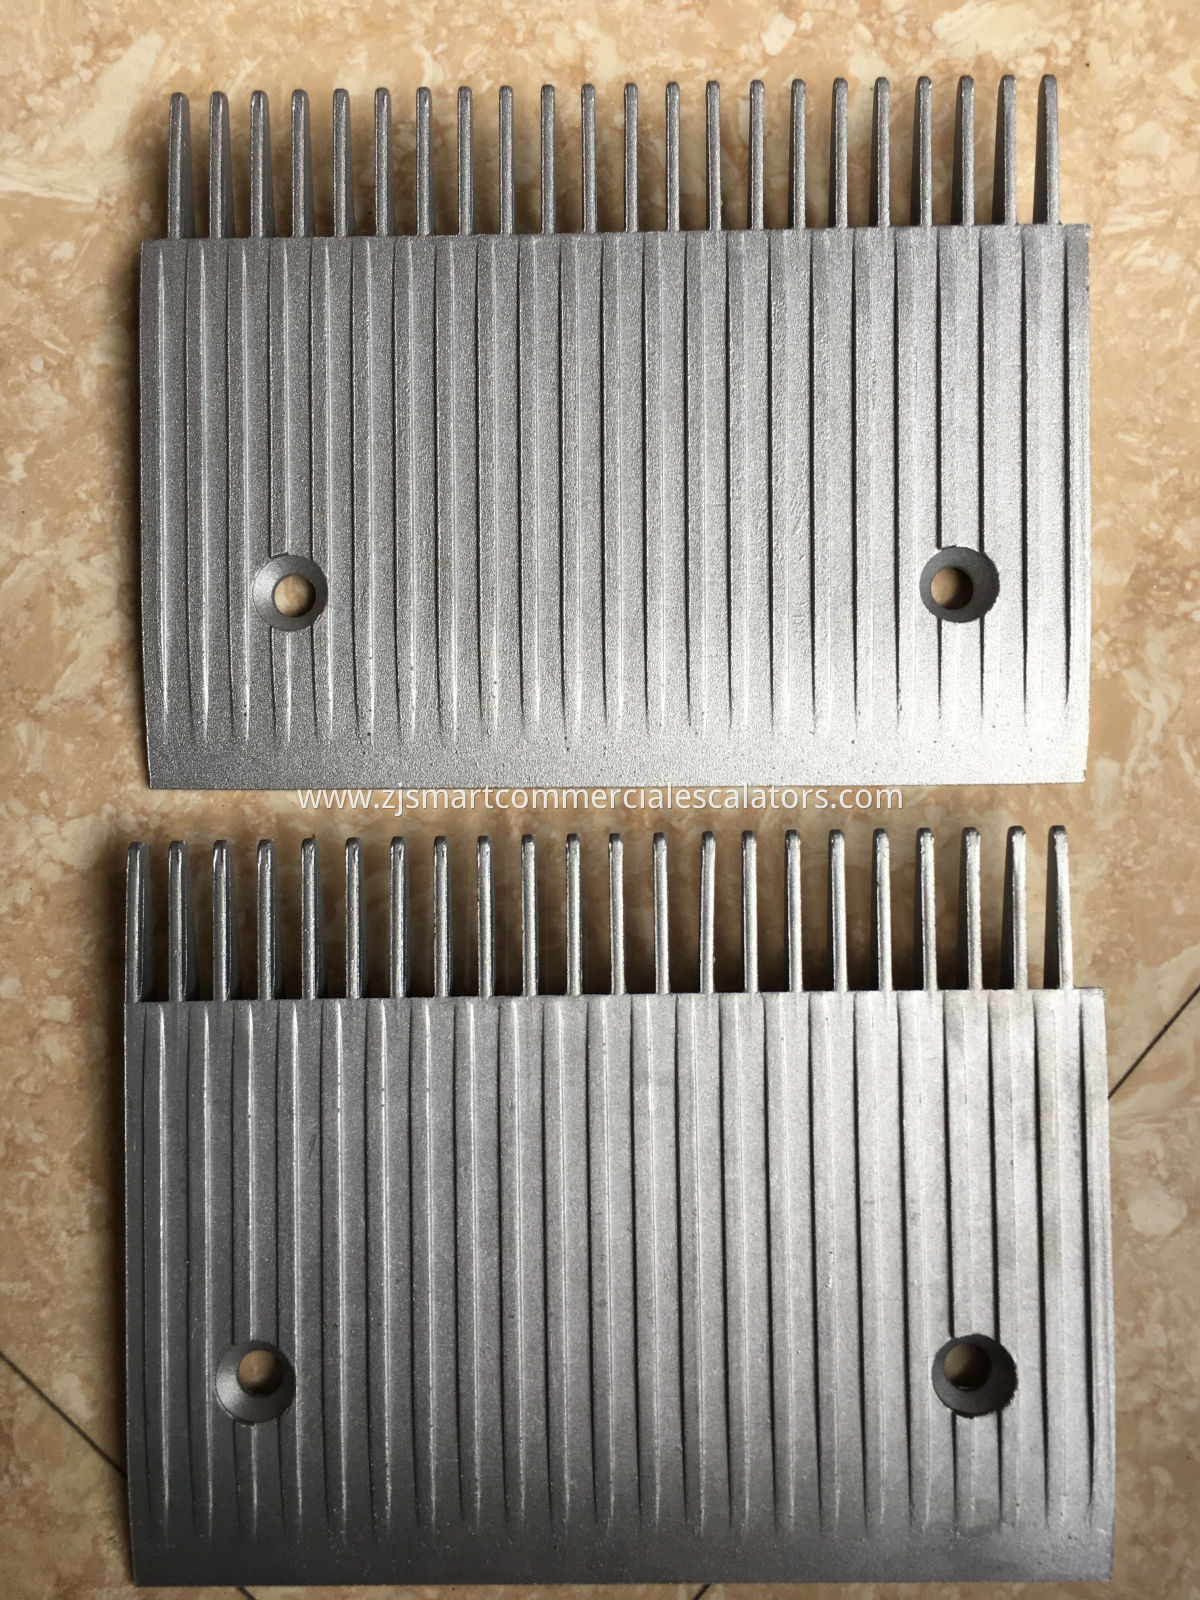 Aluminium Alloy Combs for Schindler Moving Sidewalks